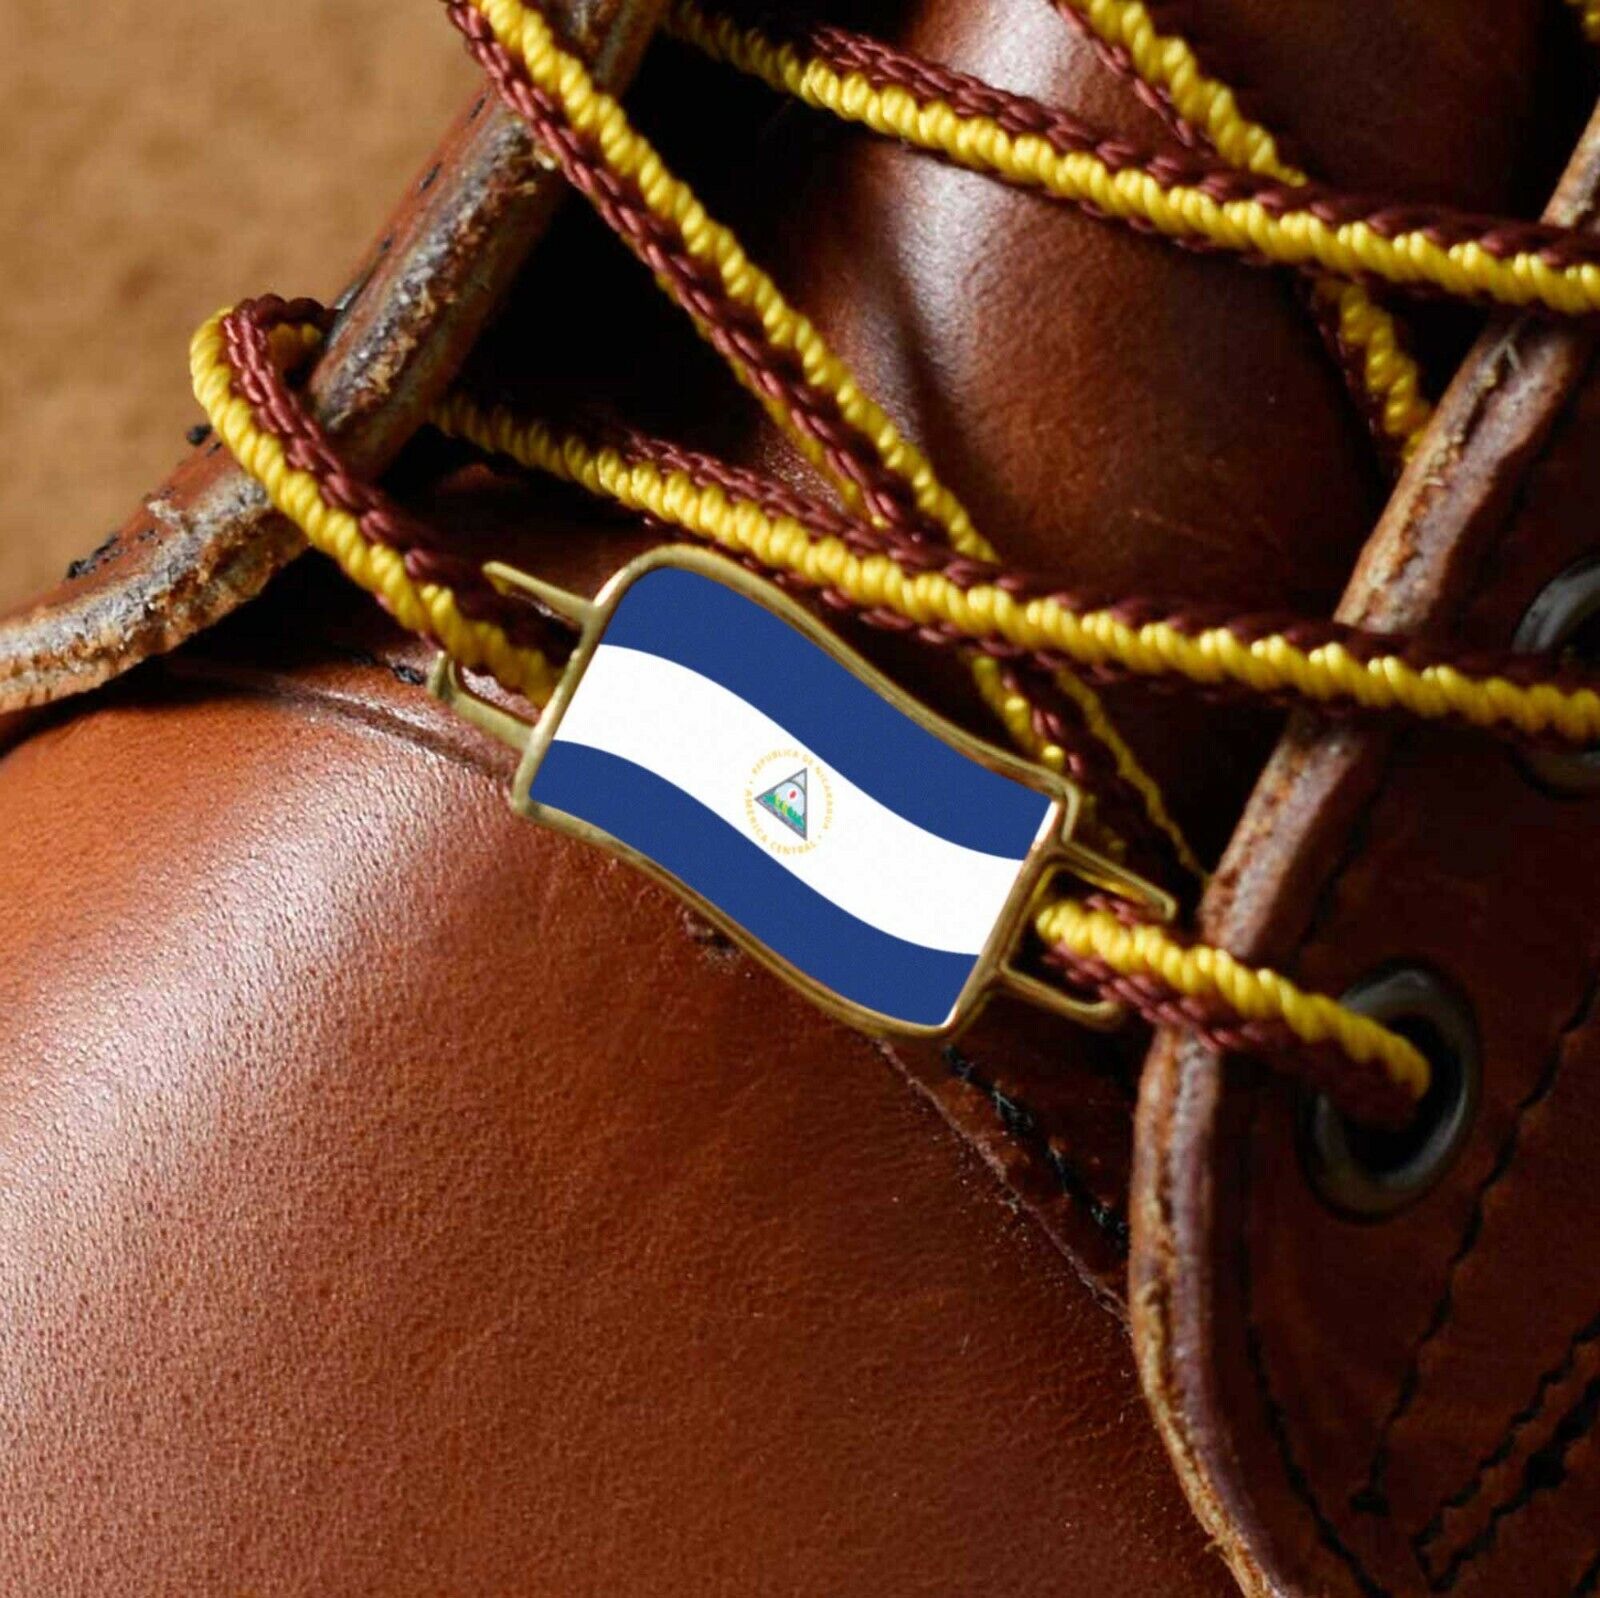 Nicaragua Flags Shoes Boot Shoelace Keeper Holder Charm BrooklynMaker